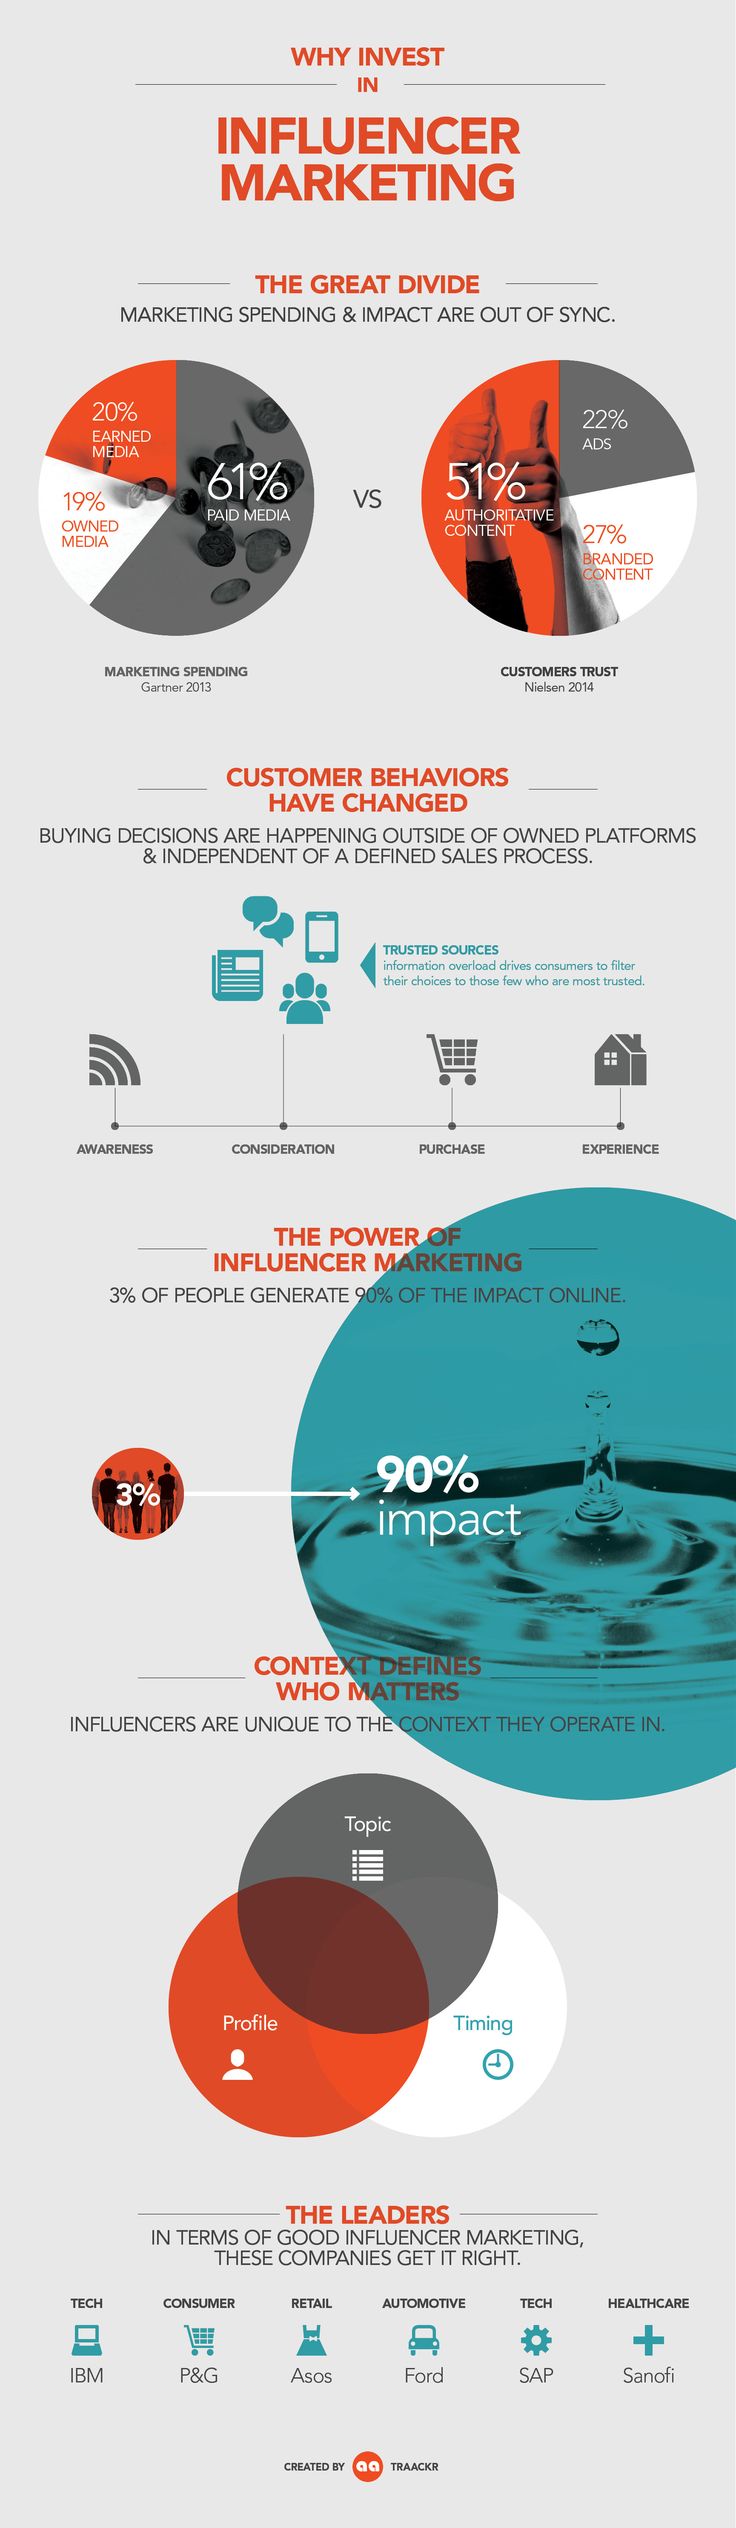 Digital-Marketing-Why-Invest-in-Influence-Marketing-infographic-Marketing-Business Digital Marketing : Why Invest in Influence Marketing    #infographic #Marketing #Business